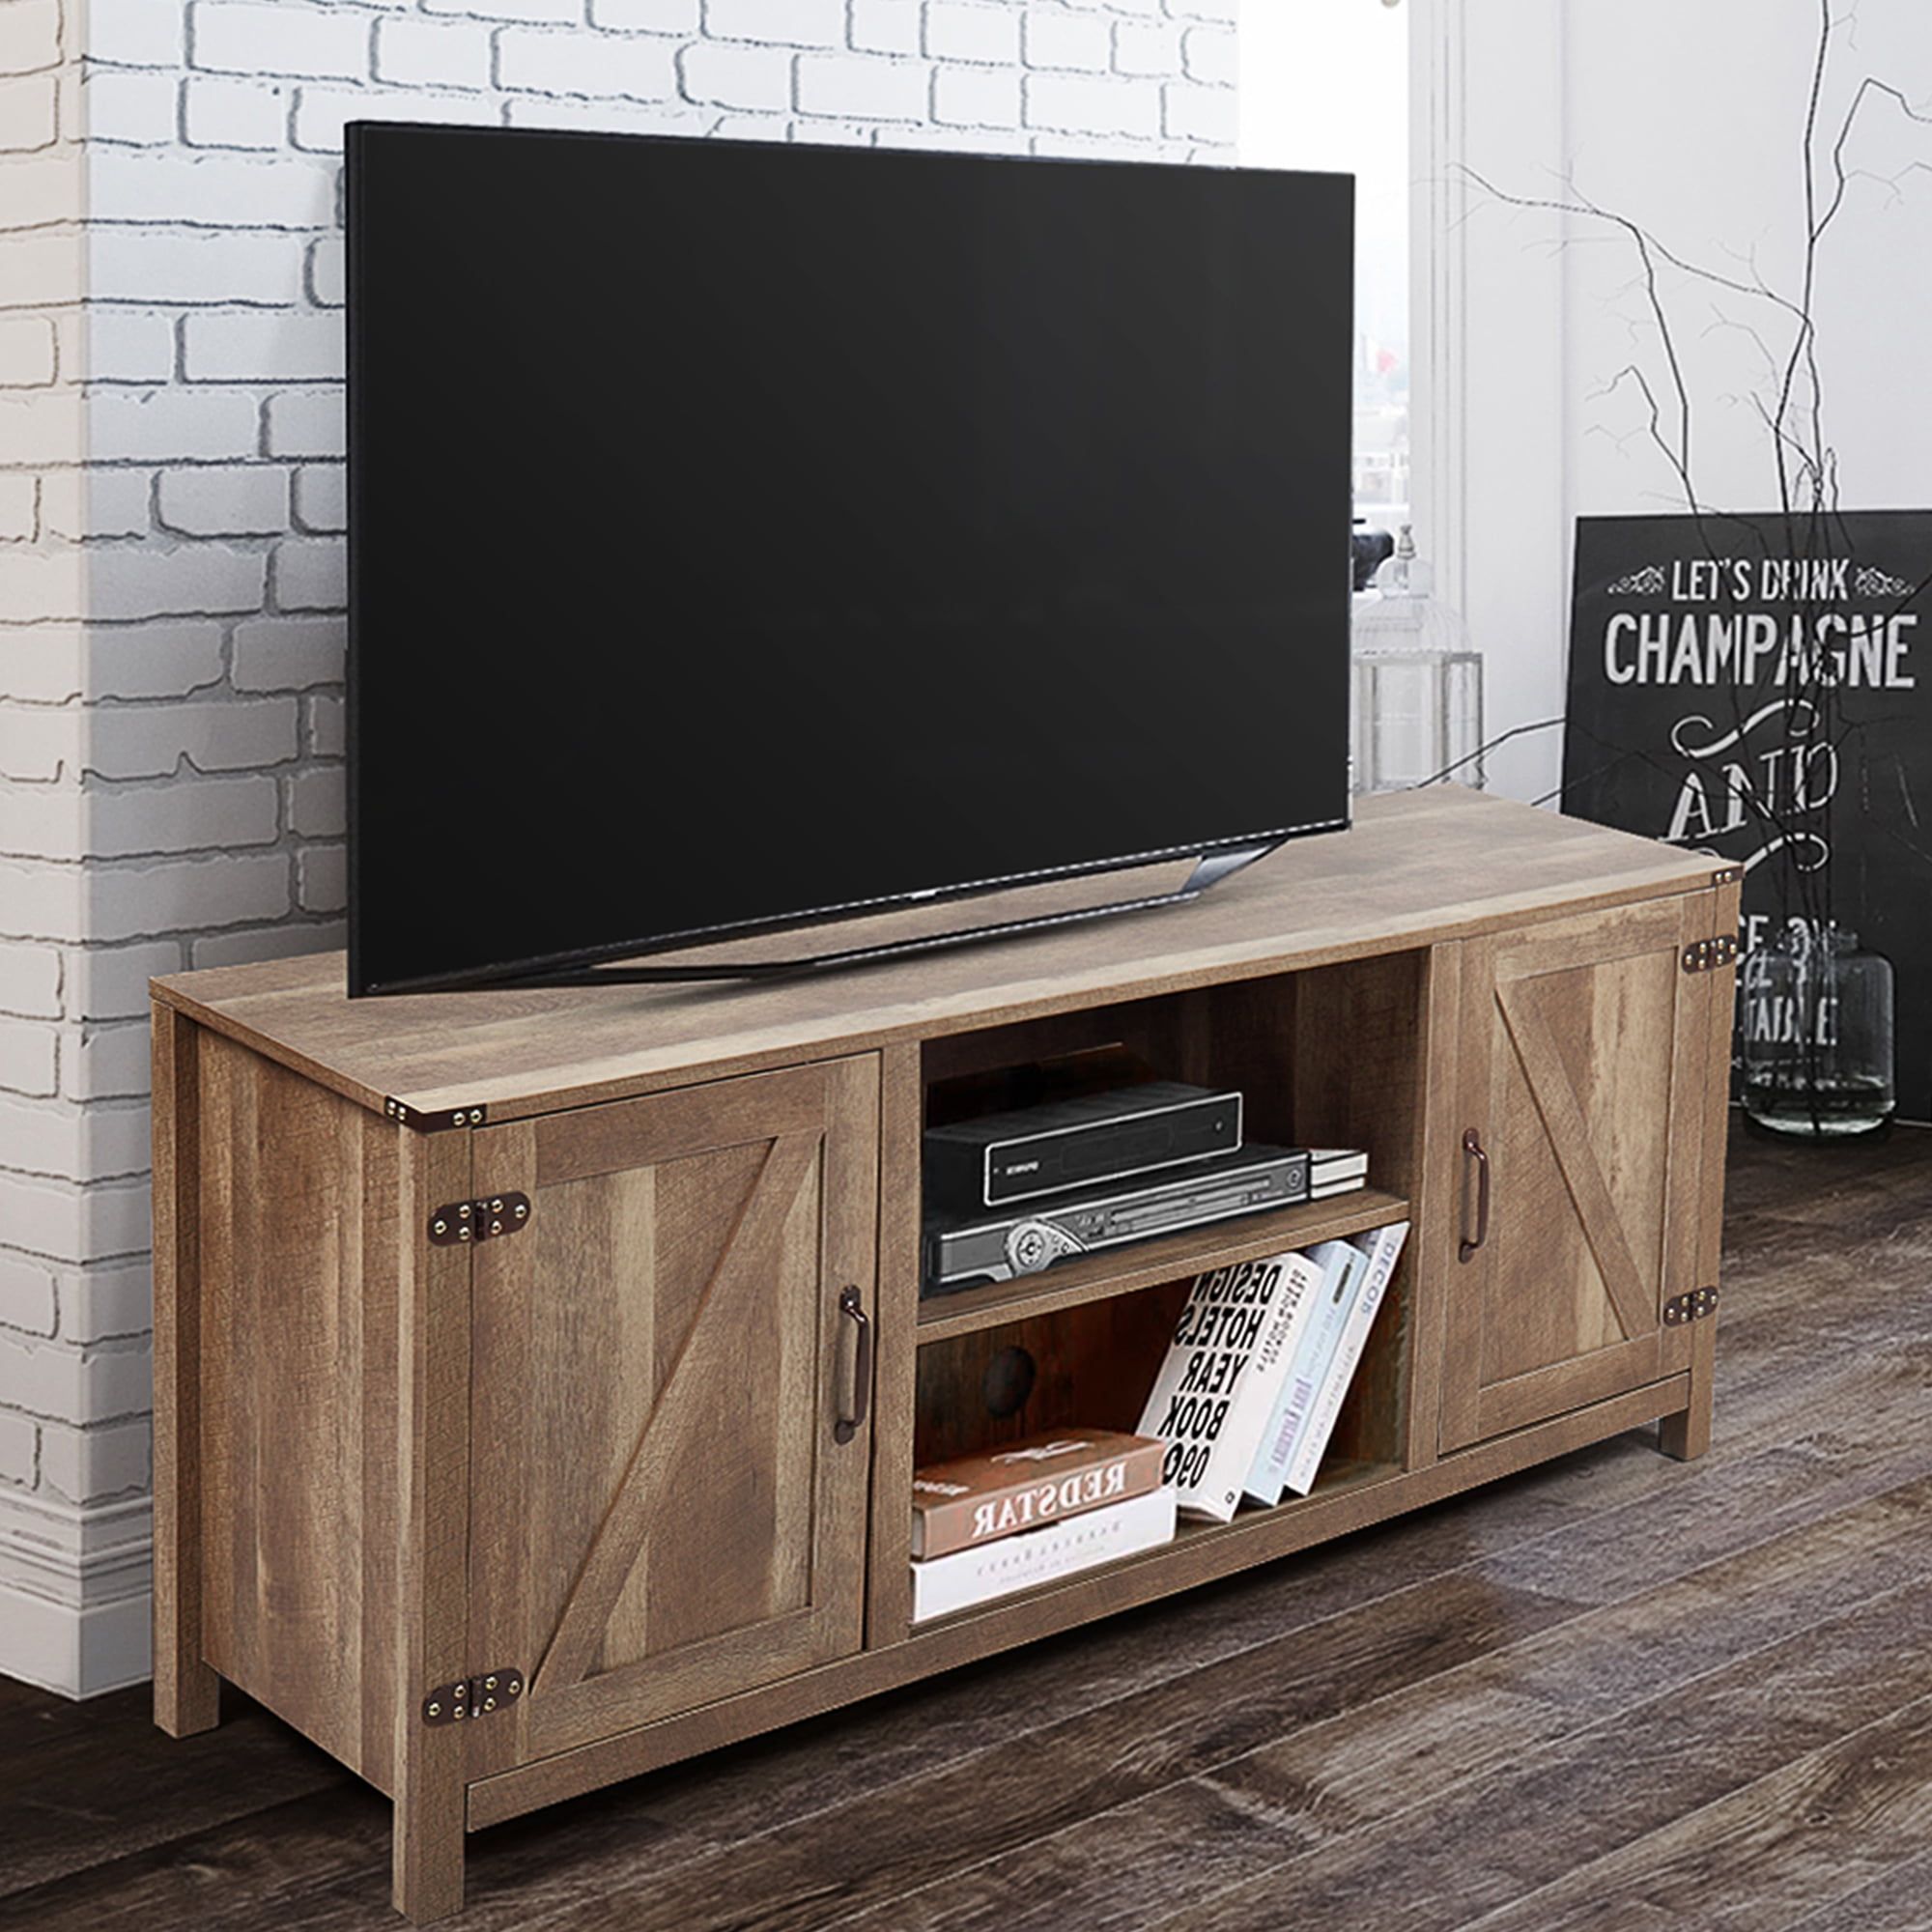 Jaxpety 58" Farmhouse Barn Door Tv Stand For Tvs Up To 65'', Wooden Pertaining To Modern Farmhouse Barn Tv Stands (View 18 of 20)